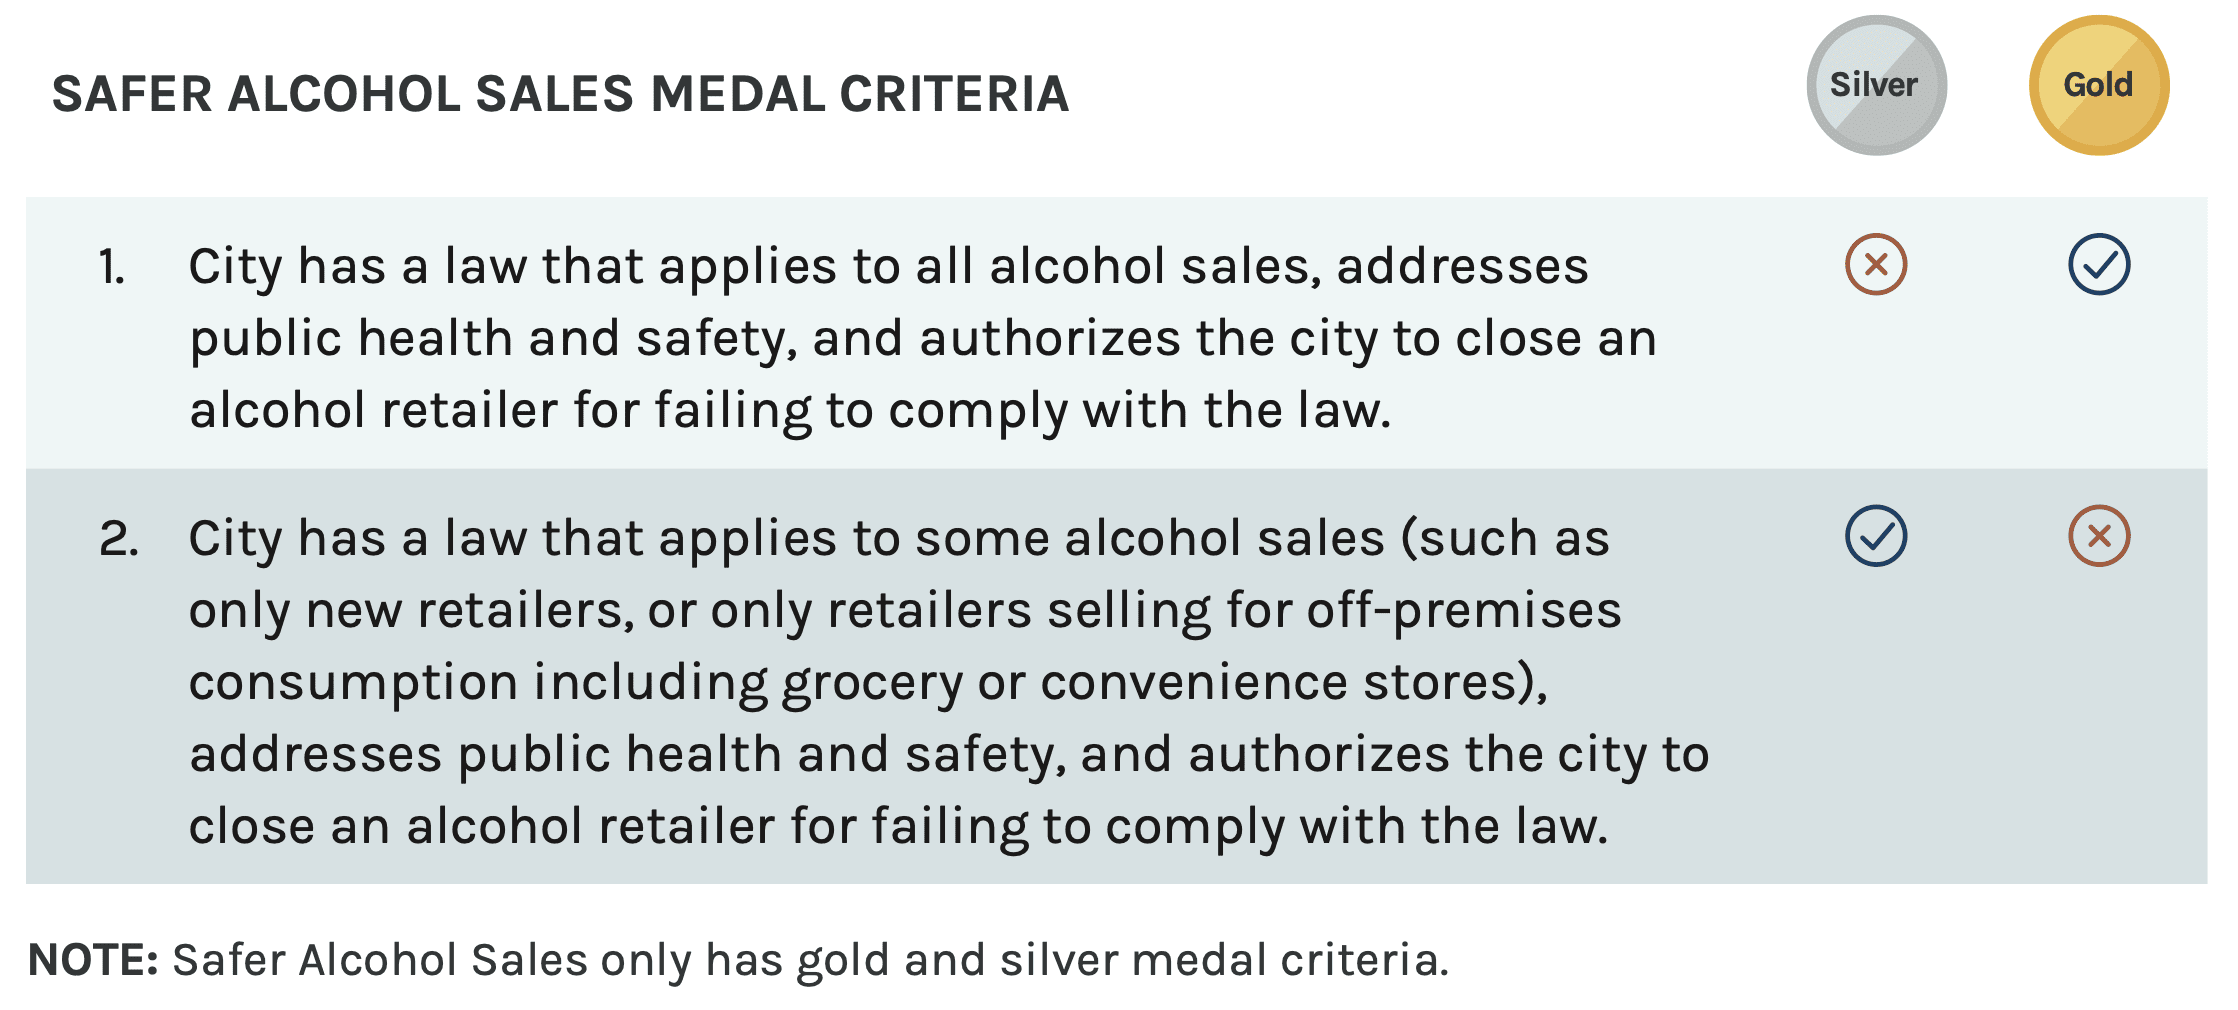 Safer Alcohol Sales medal criteria gold and silver